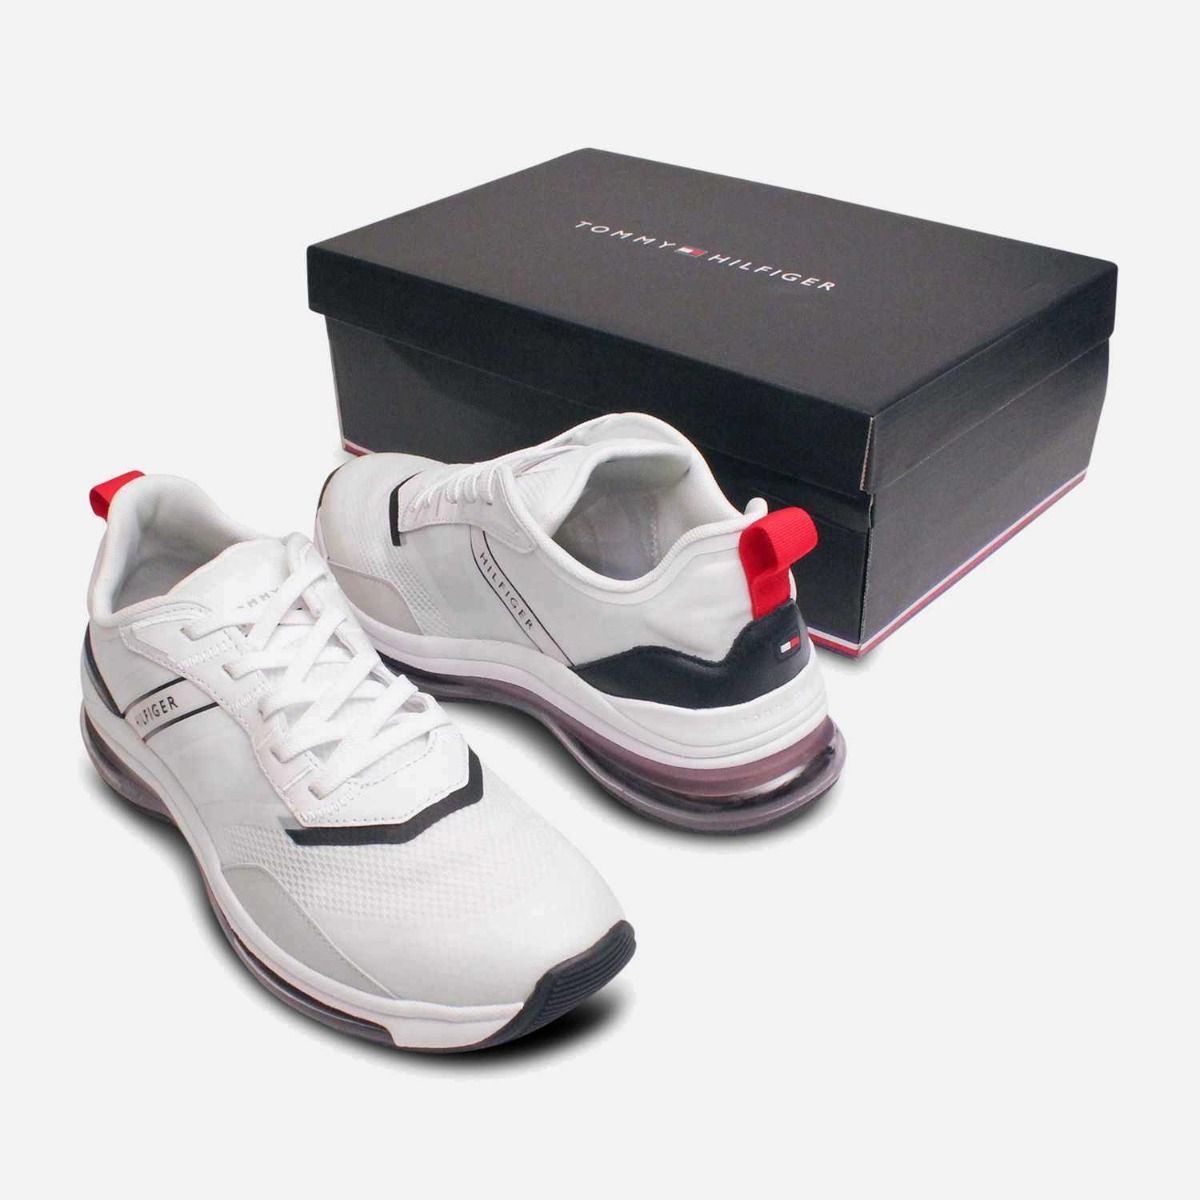 volgens Kenia Kudde Tommy Hilfiger Air Runner Sports Shoes in White